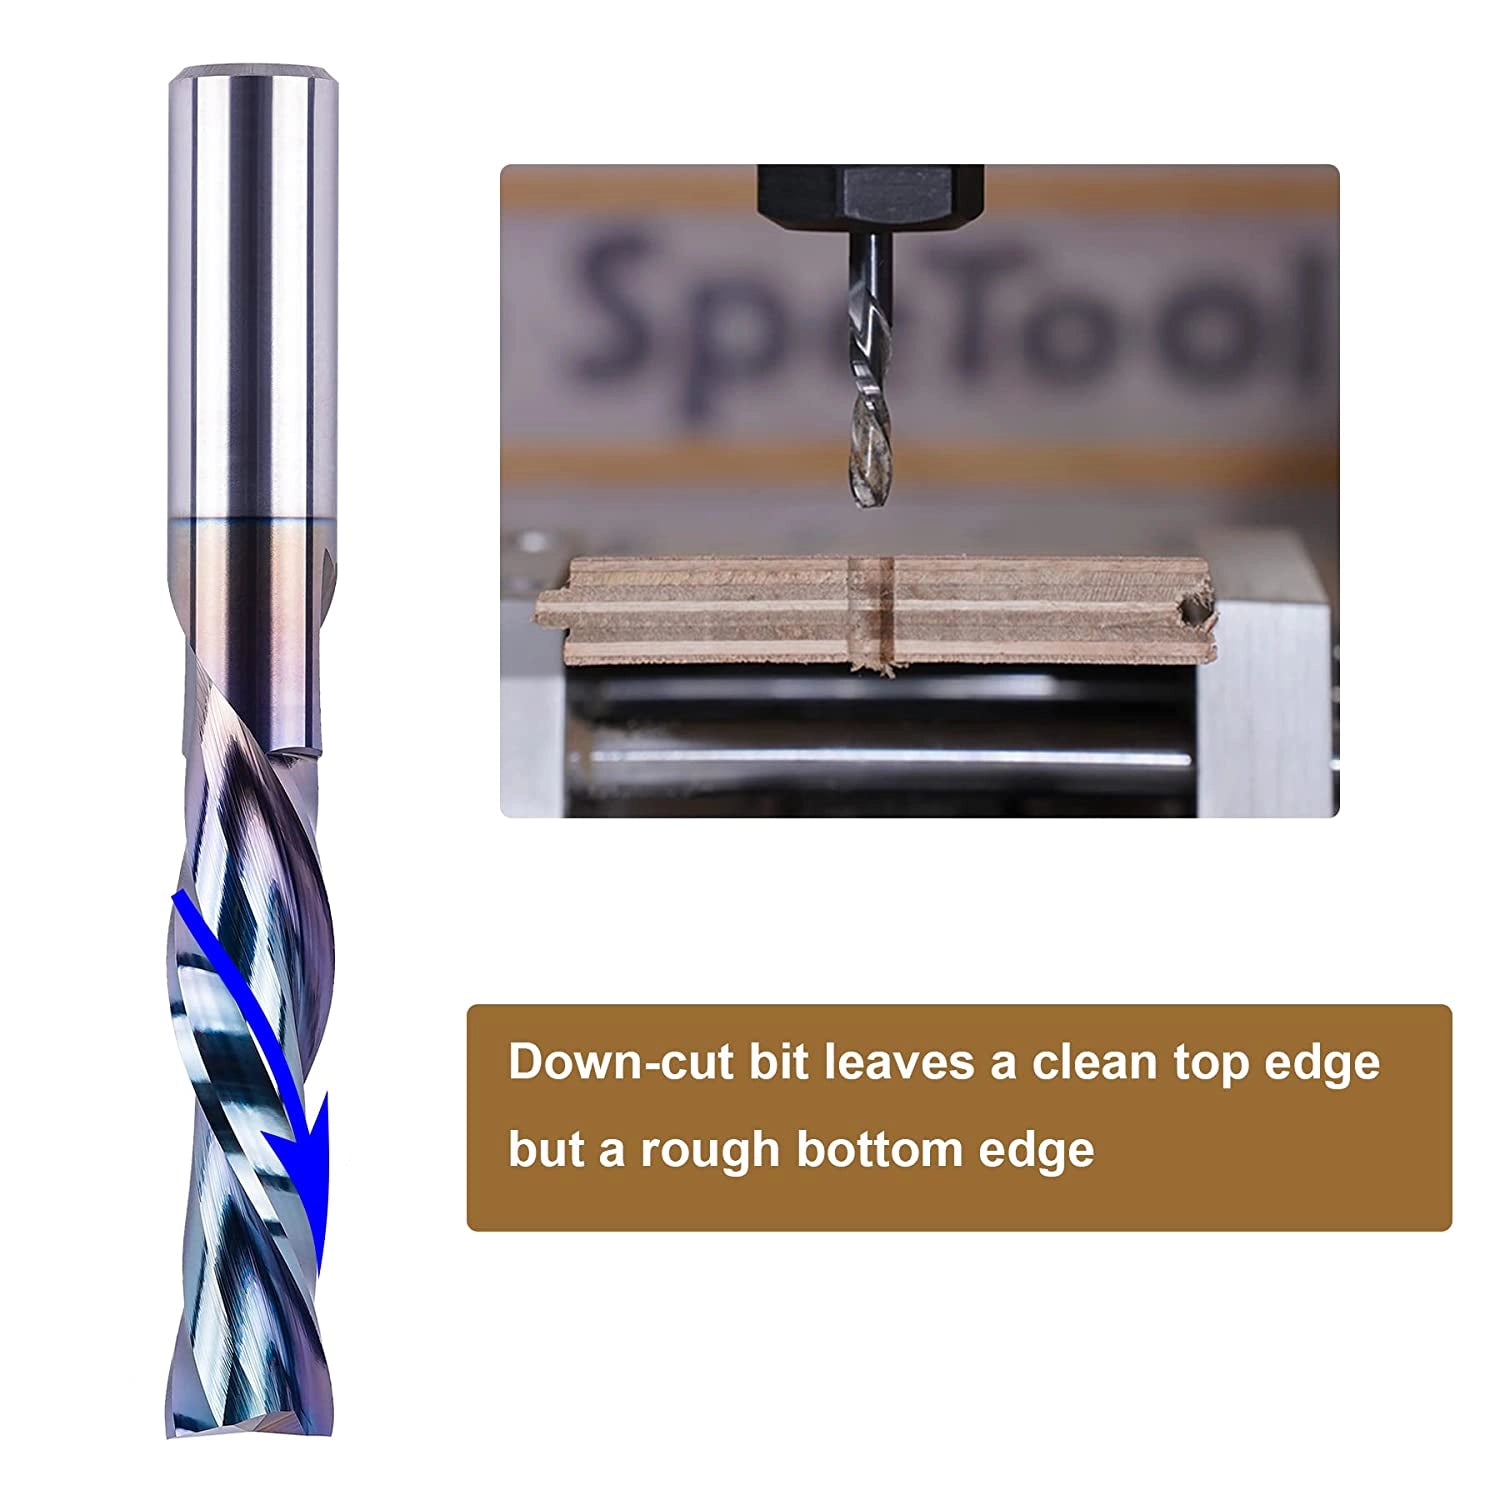 SpeTool Down Cut 1/2 Dia 4 Inch Extra Long Tool Life Coated Router Bit